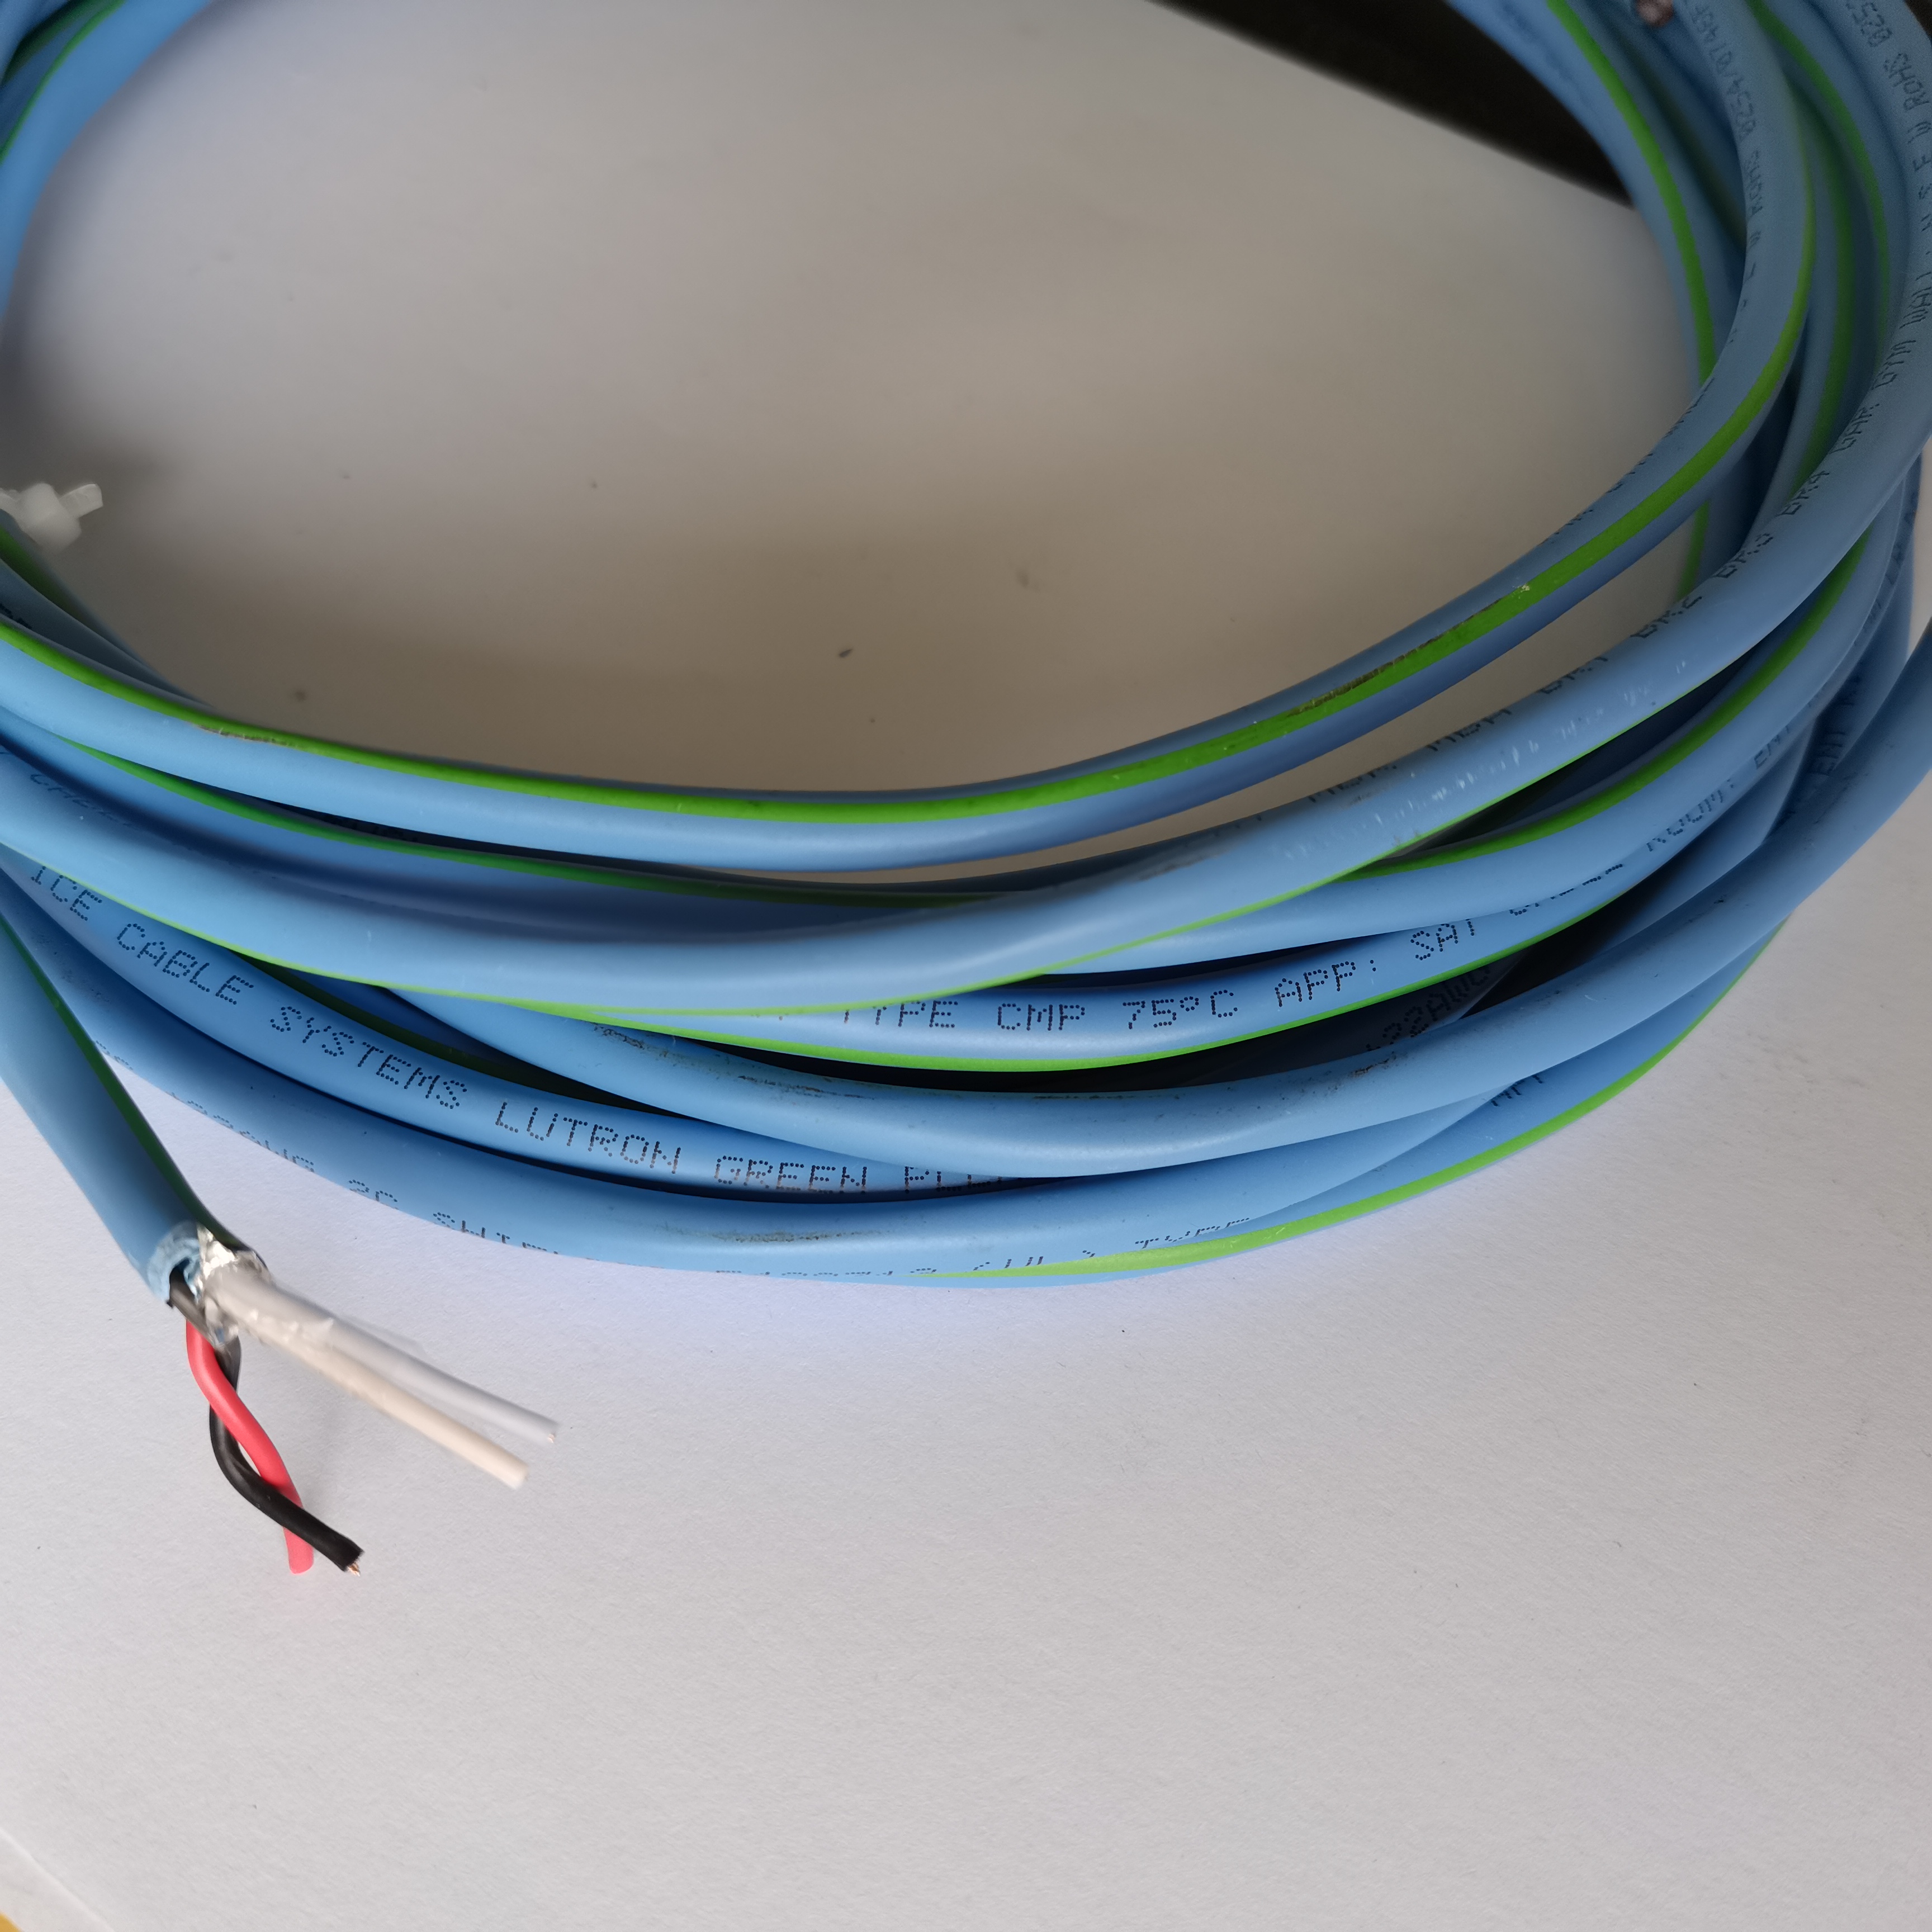 ETFE Cable For PTC NTC RTD heating etfe  wire cable cross linked etfe  wire cable	 high temperature etfe insulation wire  flr7y automotive etfe cable